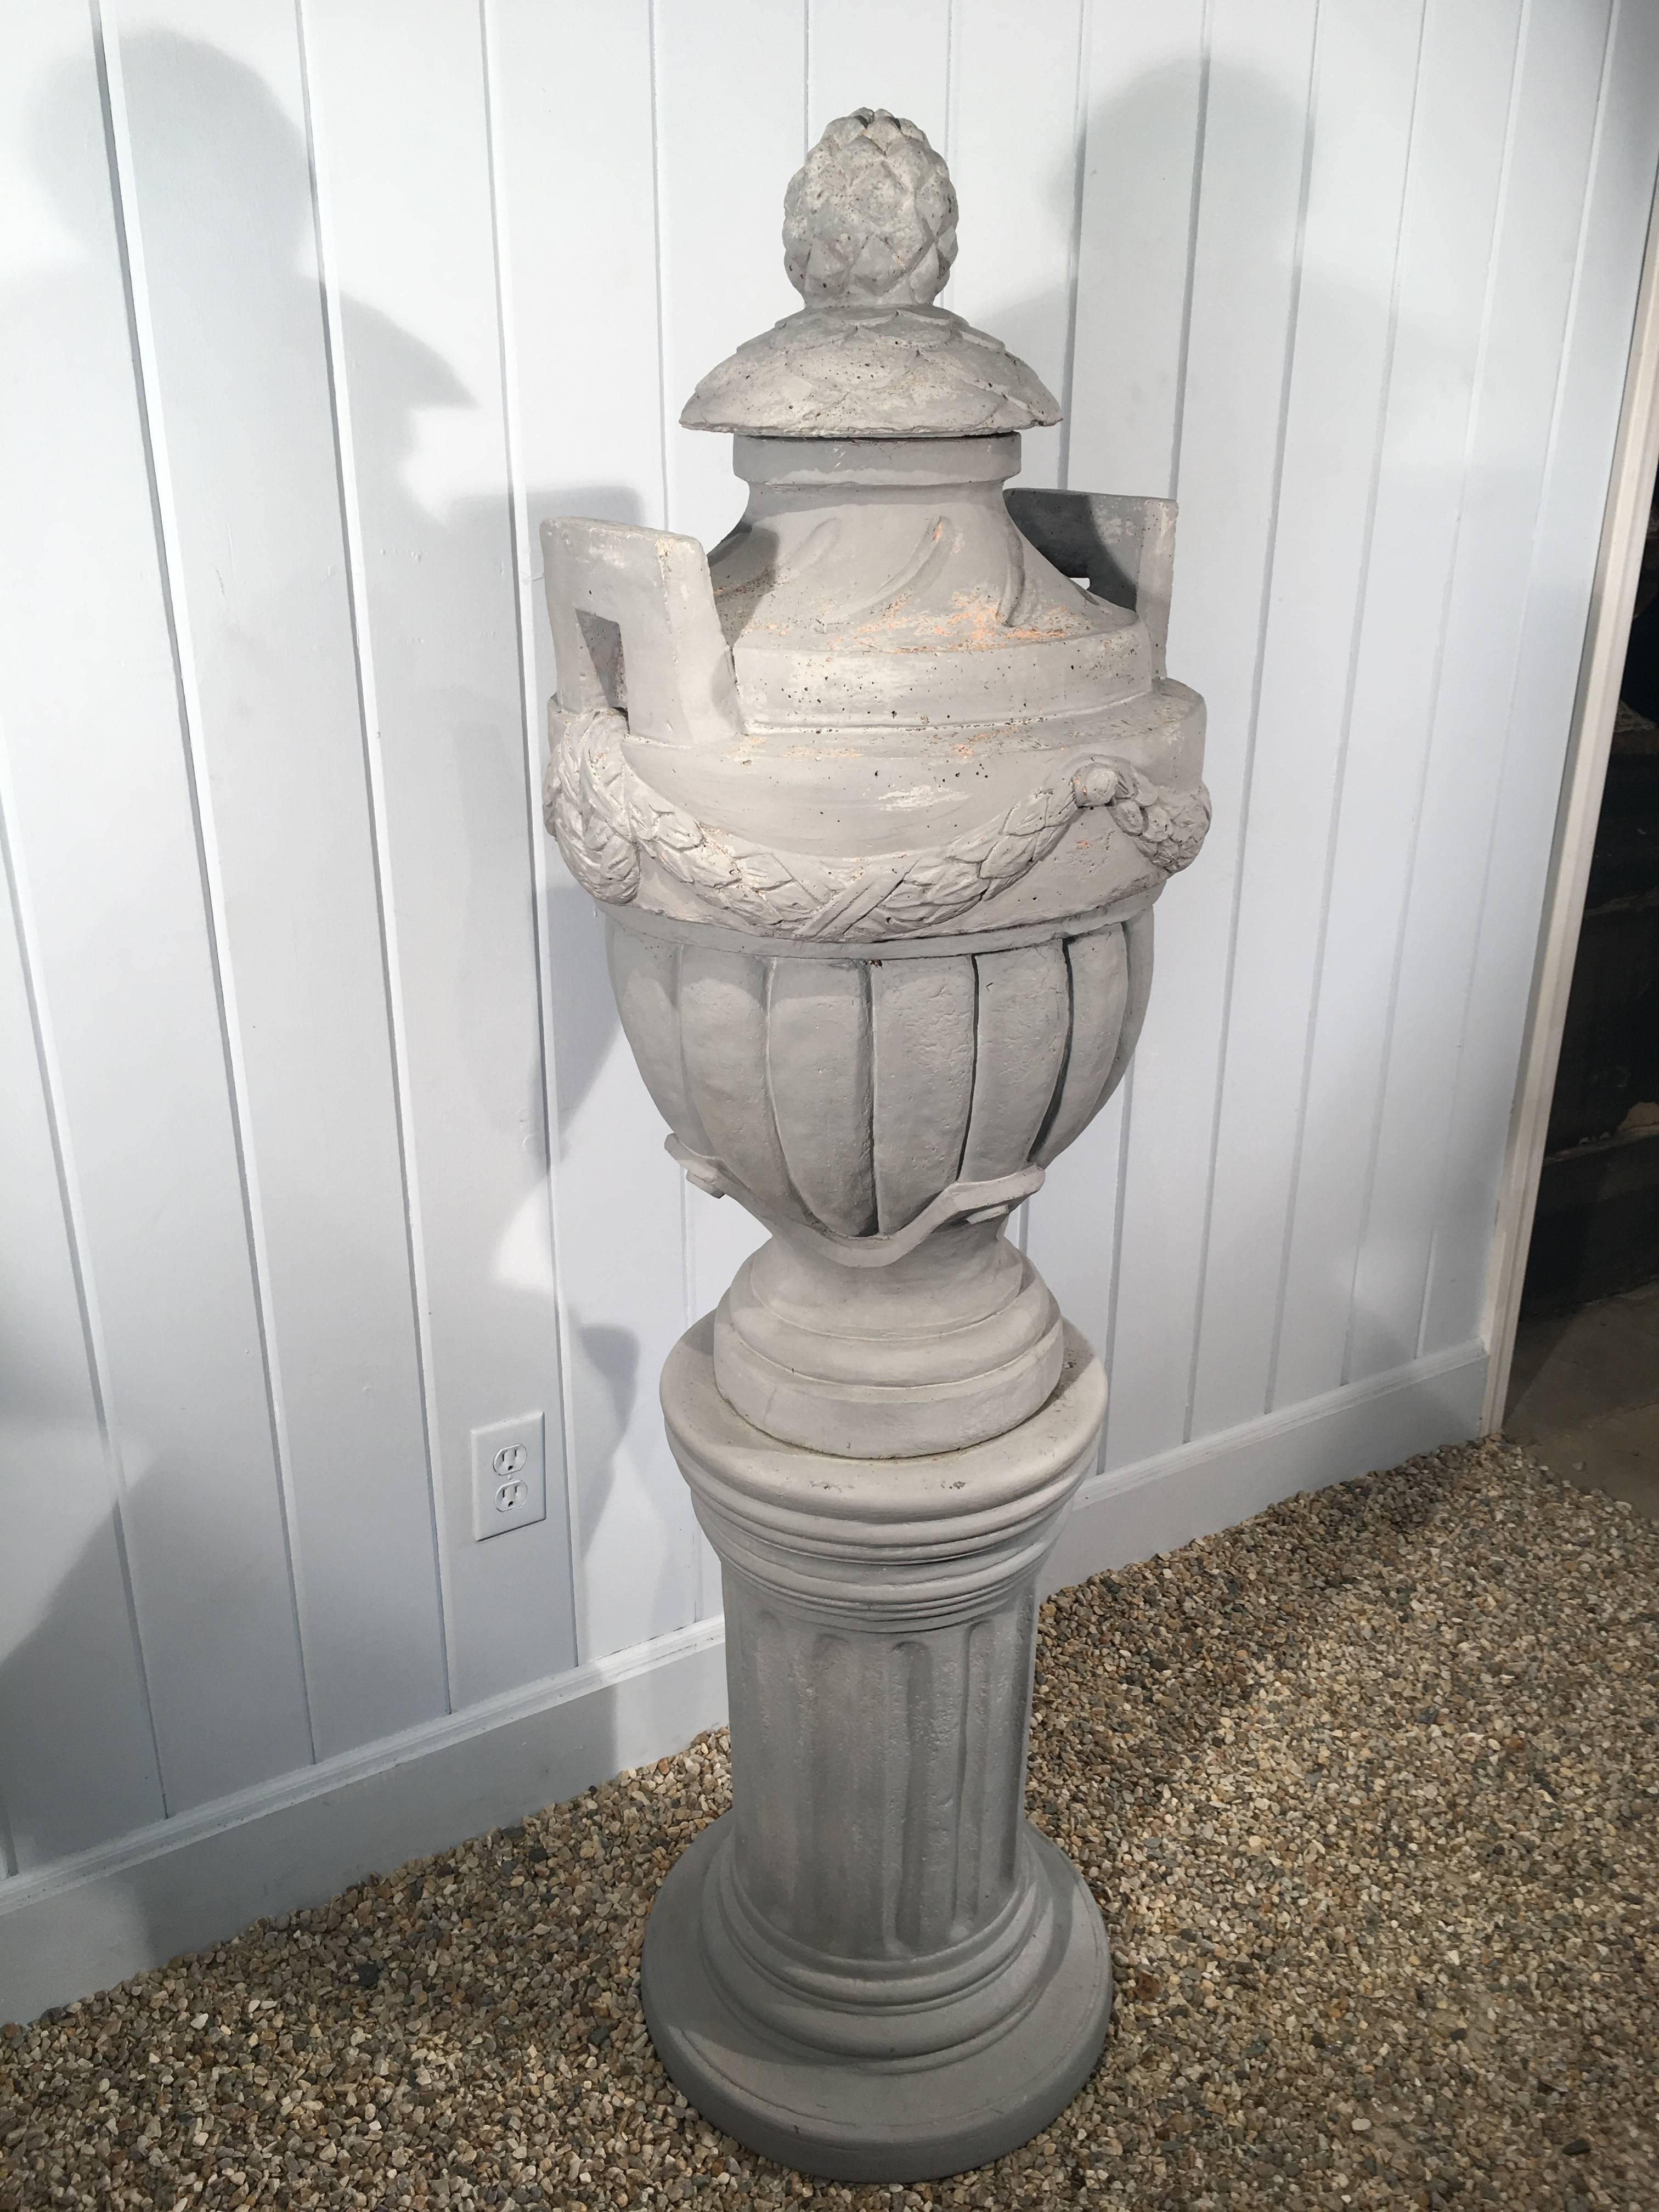 We bought these two pieces separately and, after painting their unattractive red surfaces in a pale grey, they make a fabulous statement together. The English cast stone Greek-style urn breaks down into 4 pieces for easy shipment and the fluted